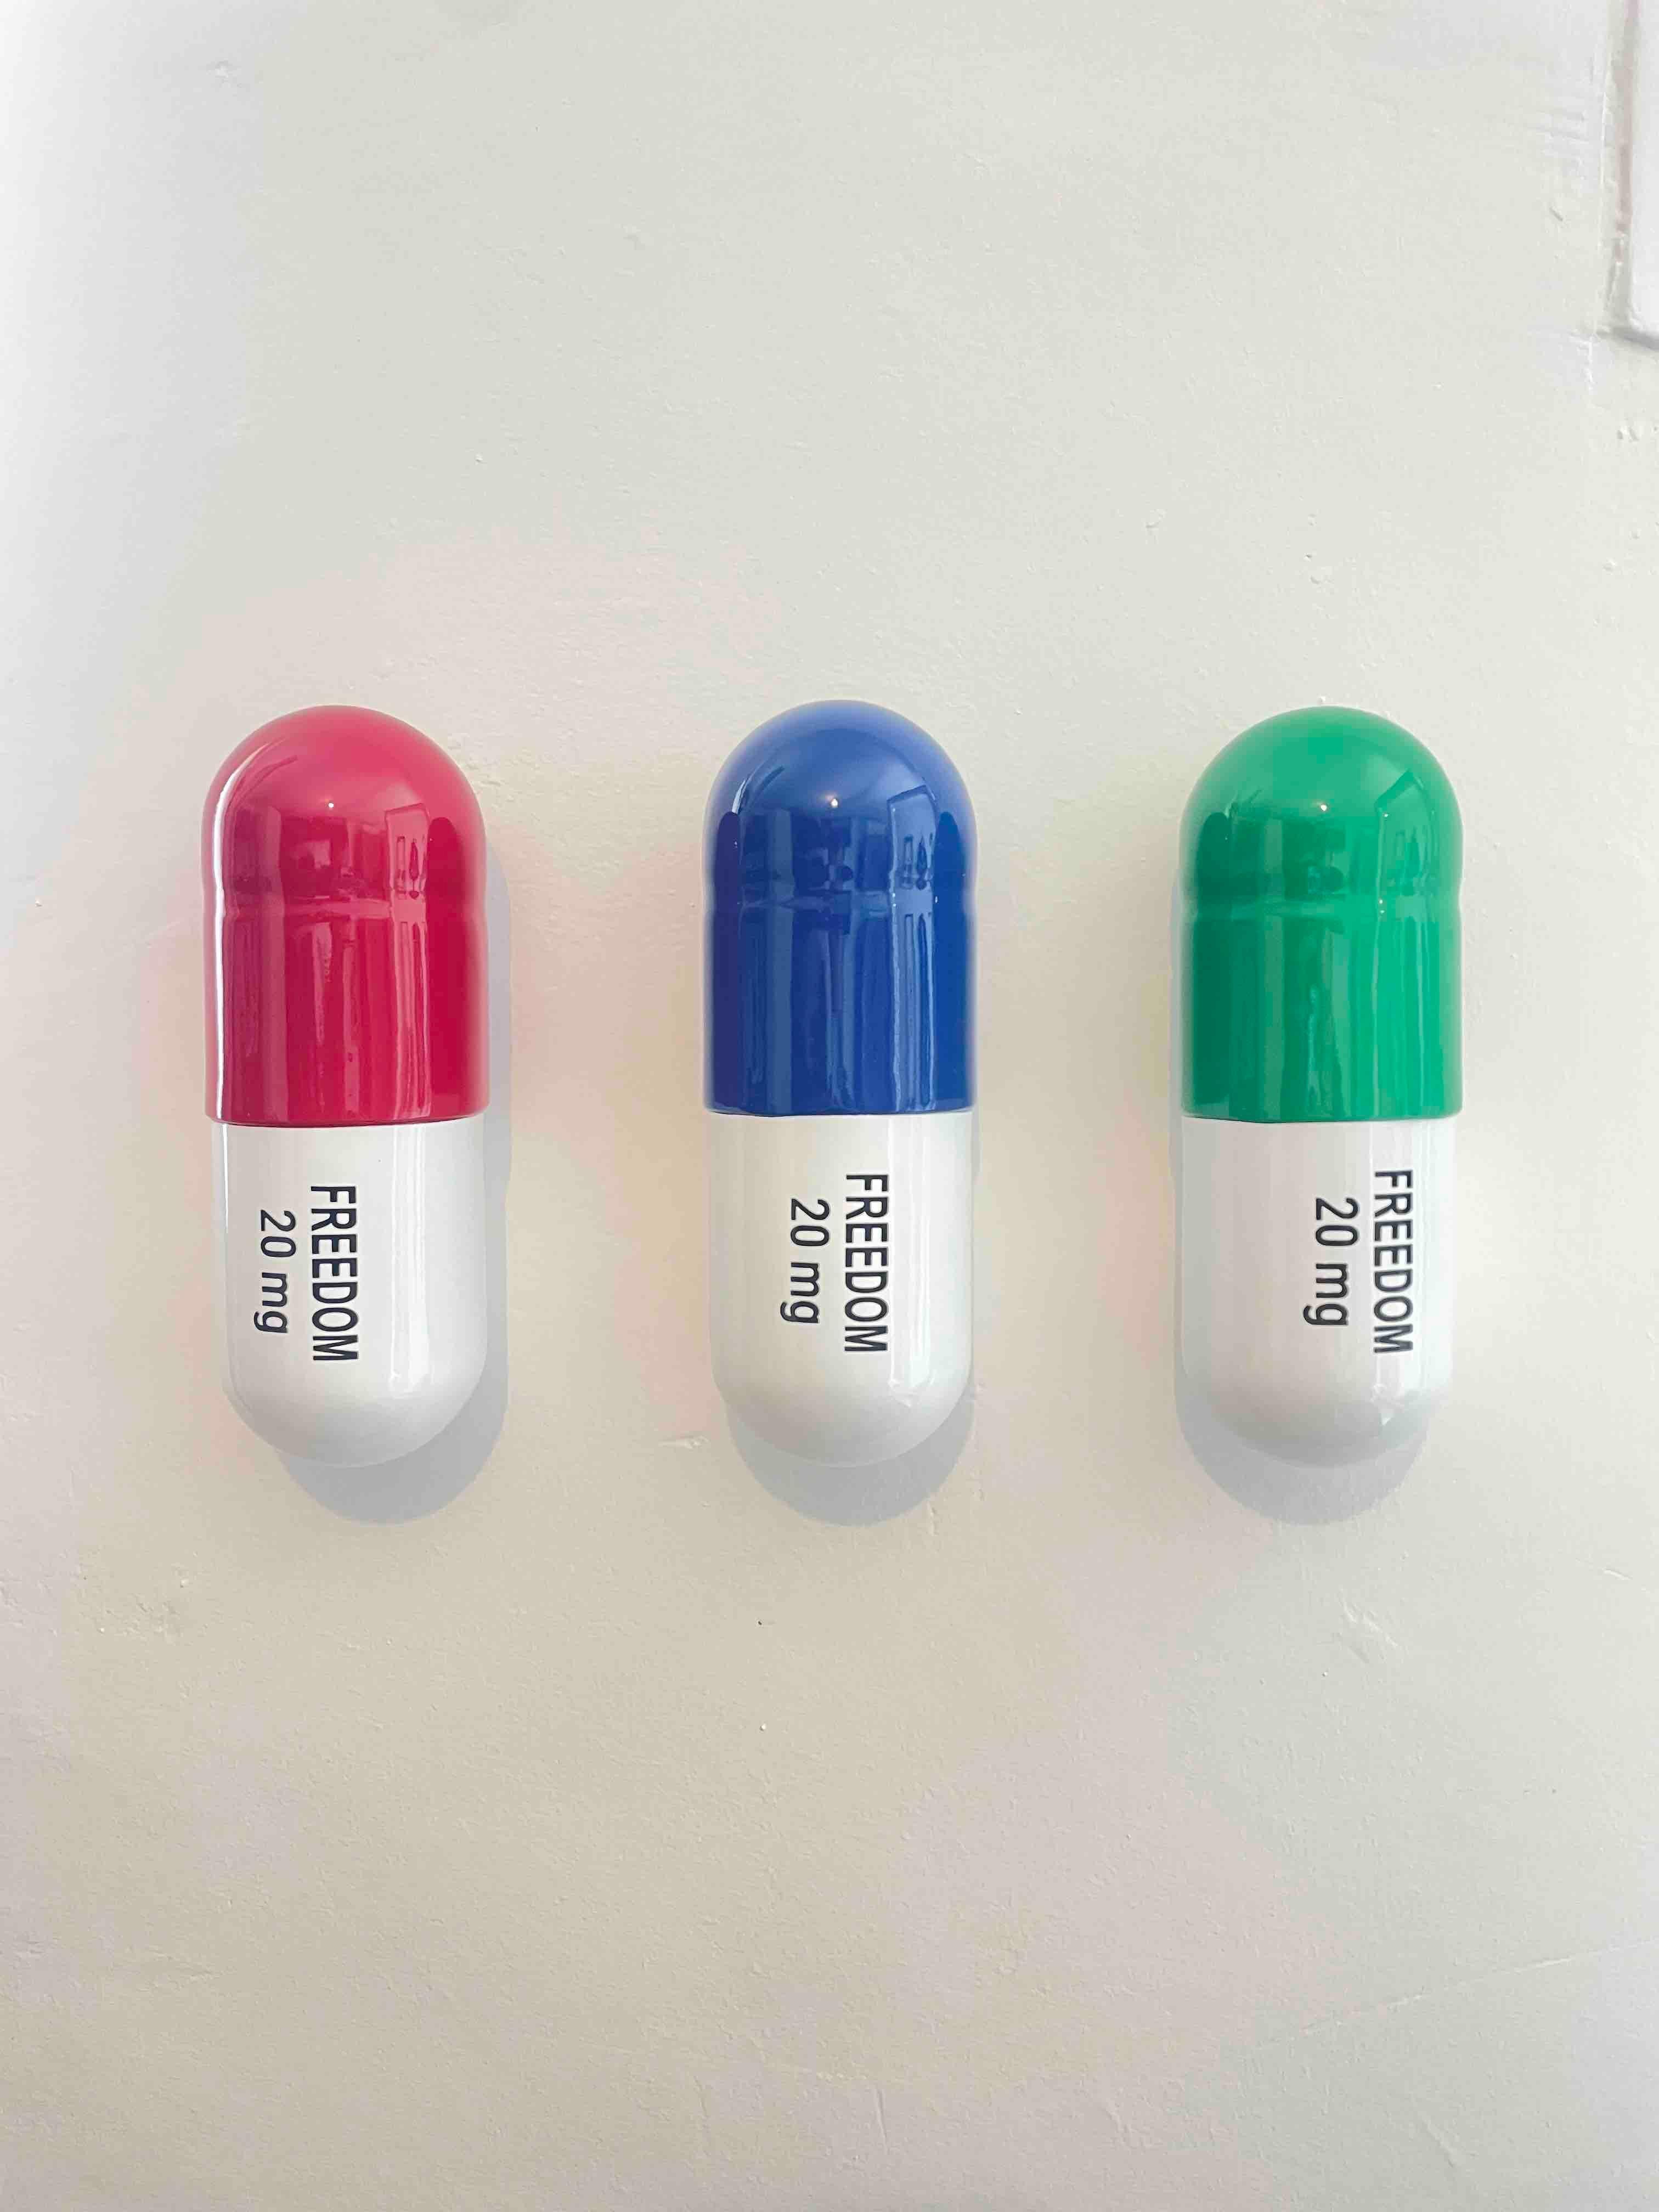 Tal Nehoray Still-Life Sculpture - 20 MG Freedom pill Combo (blue, green and red) - figurative sculpture